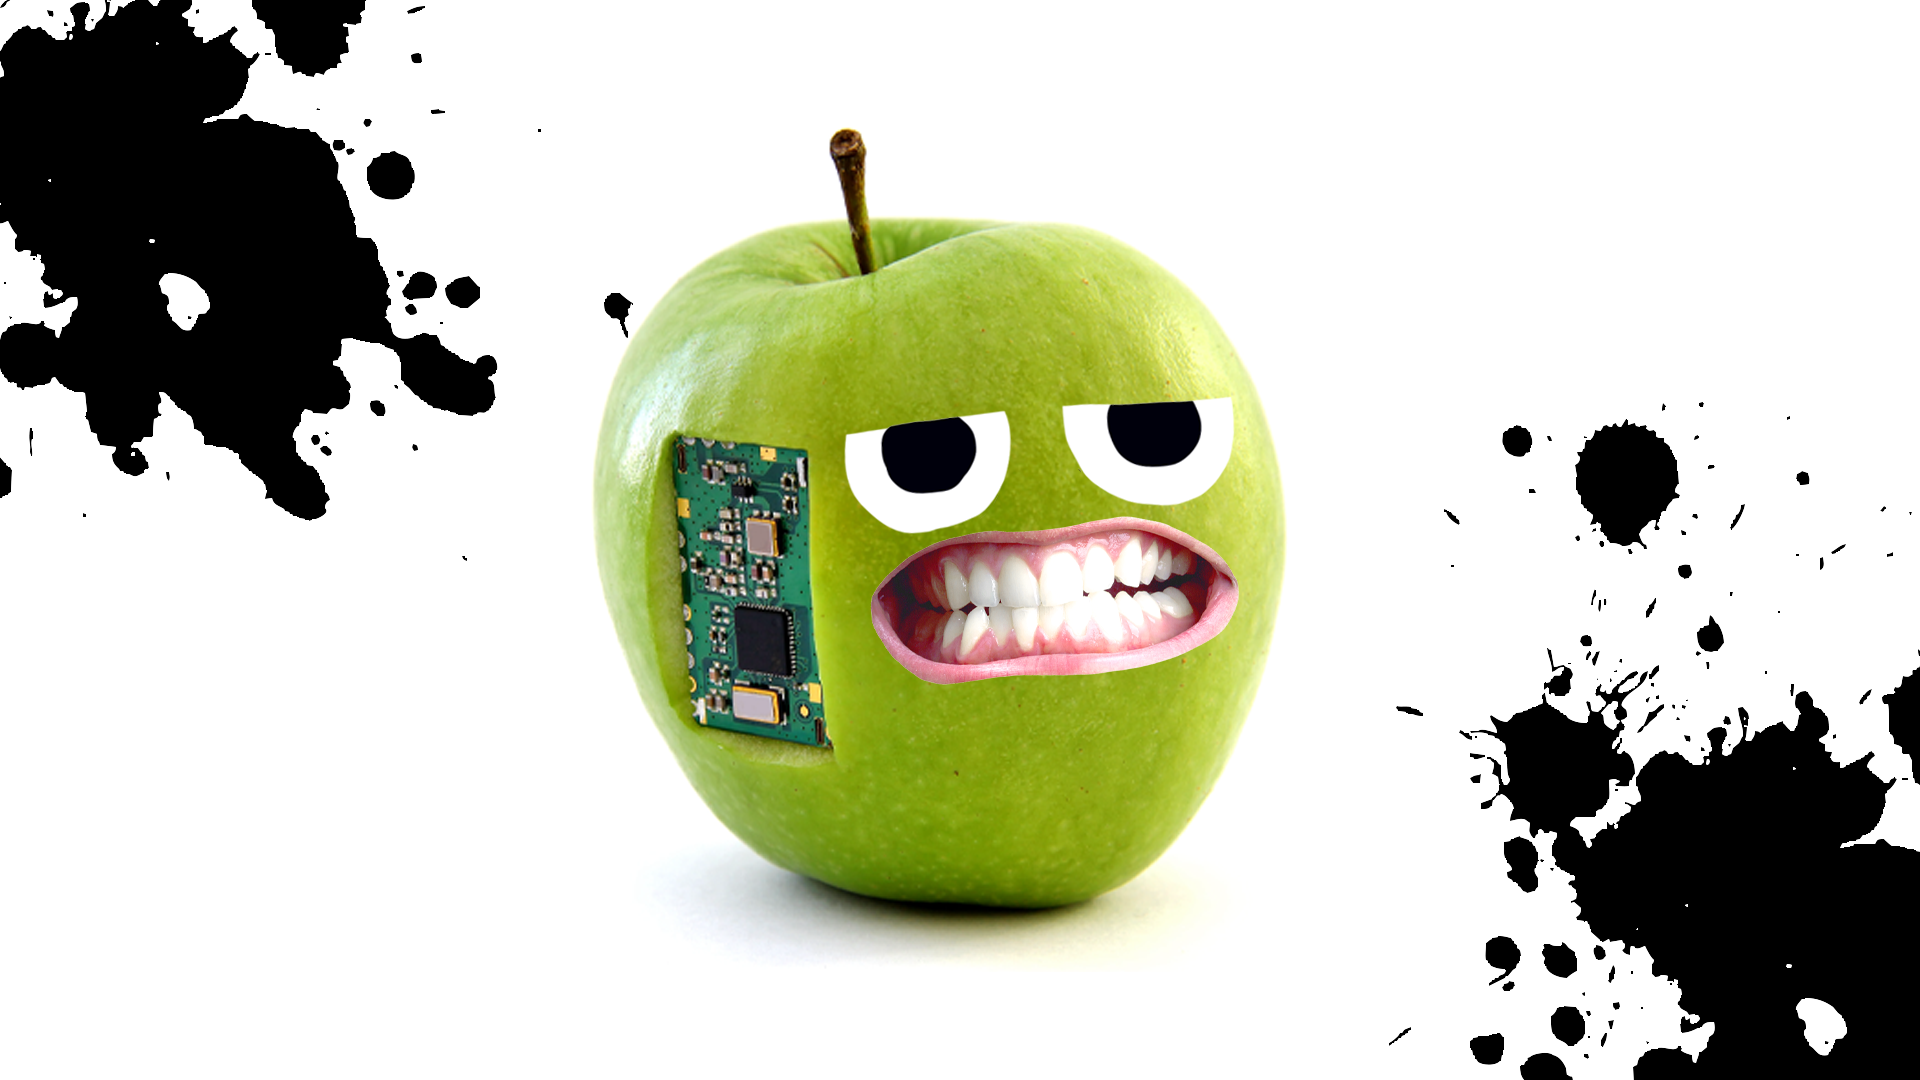 An apple turned into a spy gadget